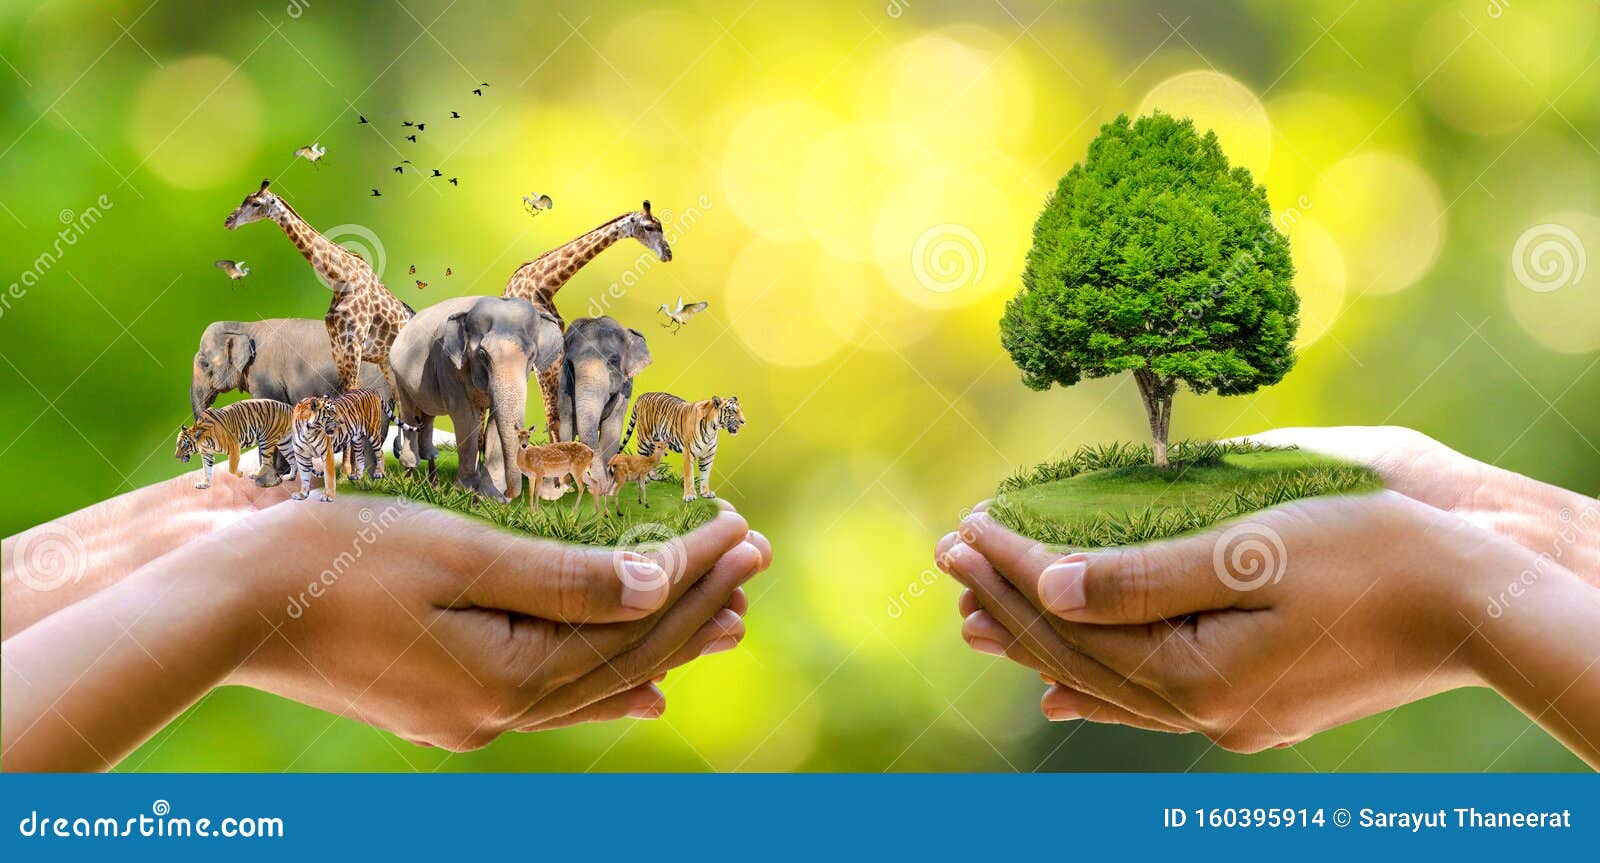 Concept Nature Reserve Conserve Wildlife Reserve Tiger Deer Global Warming  Food Loaf Ecology Human Hands Protecting the Wild and Stock Photo - Image  of forest, beauty: 160395914